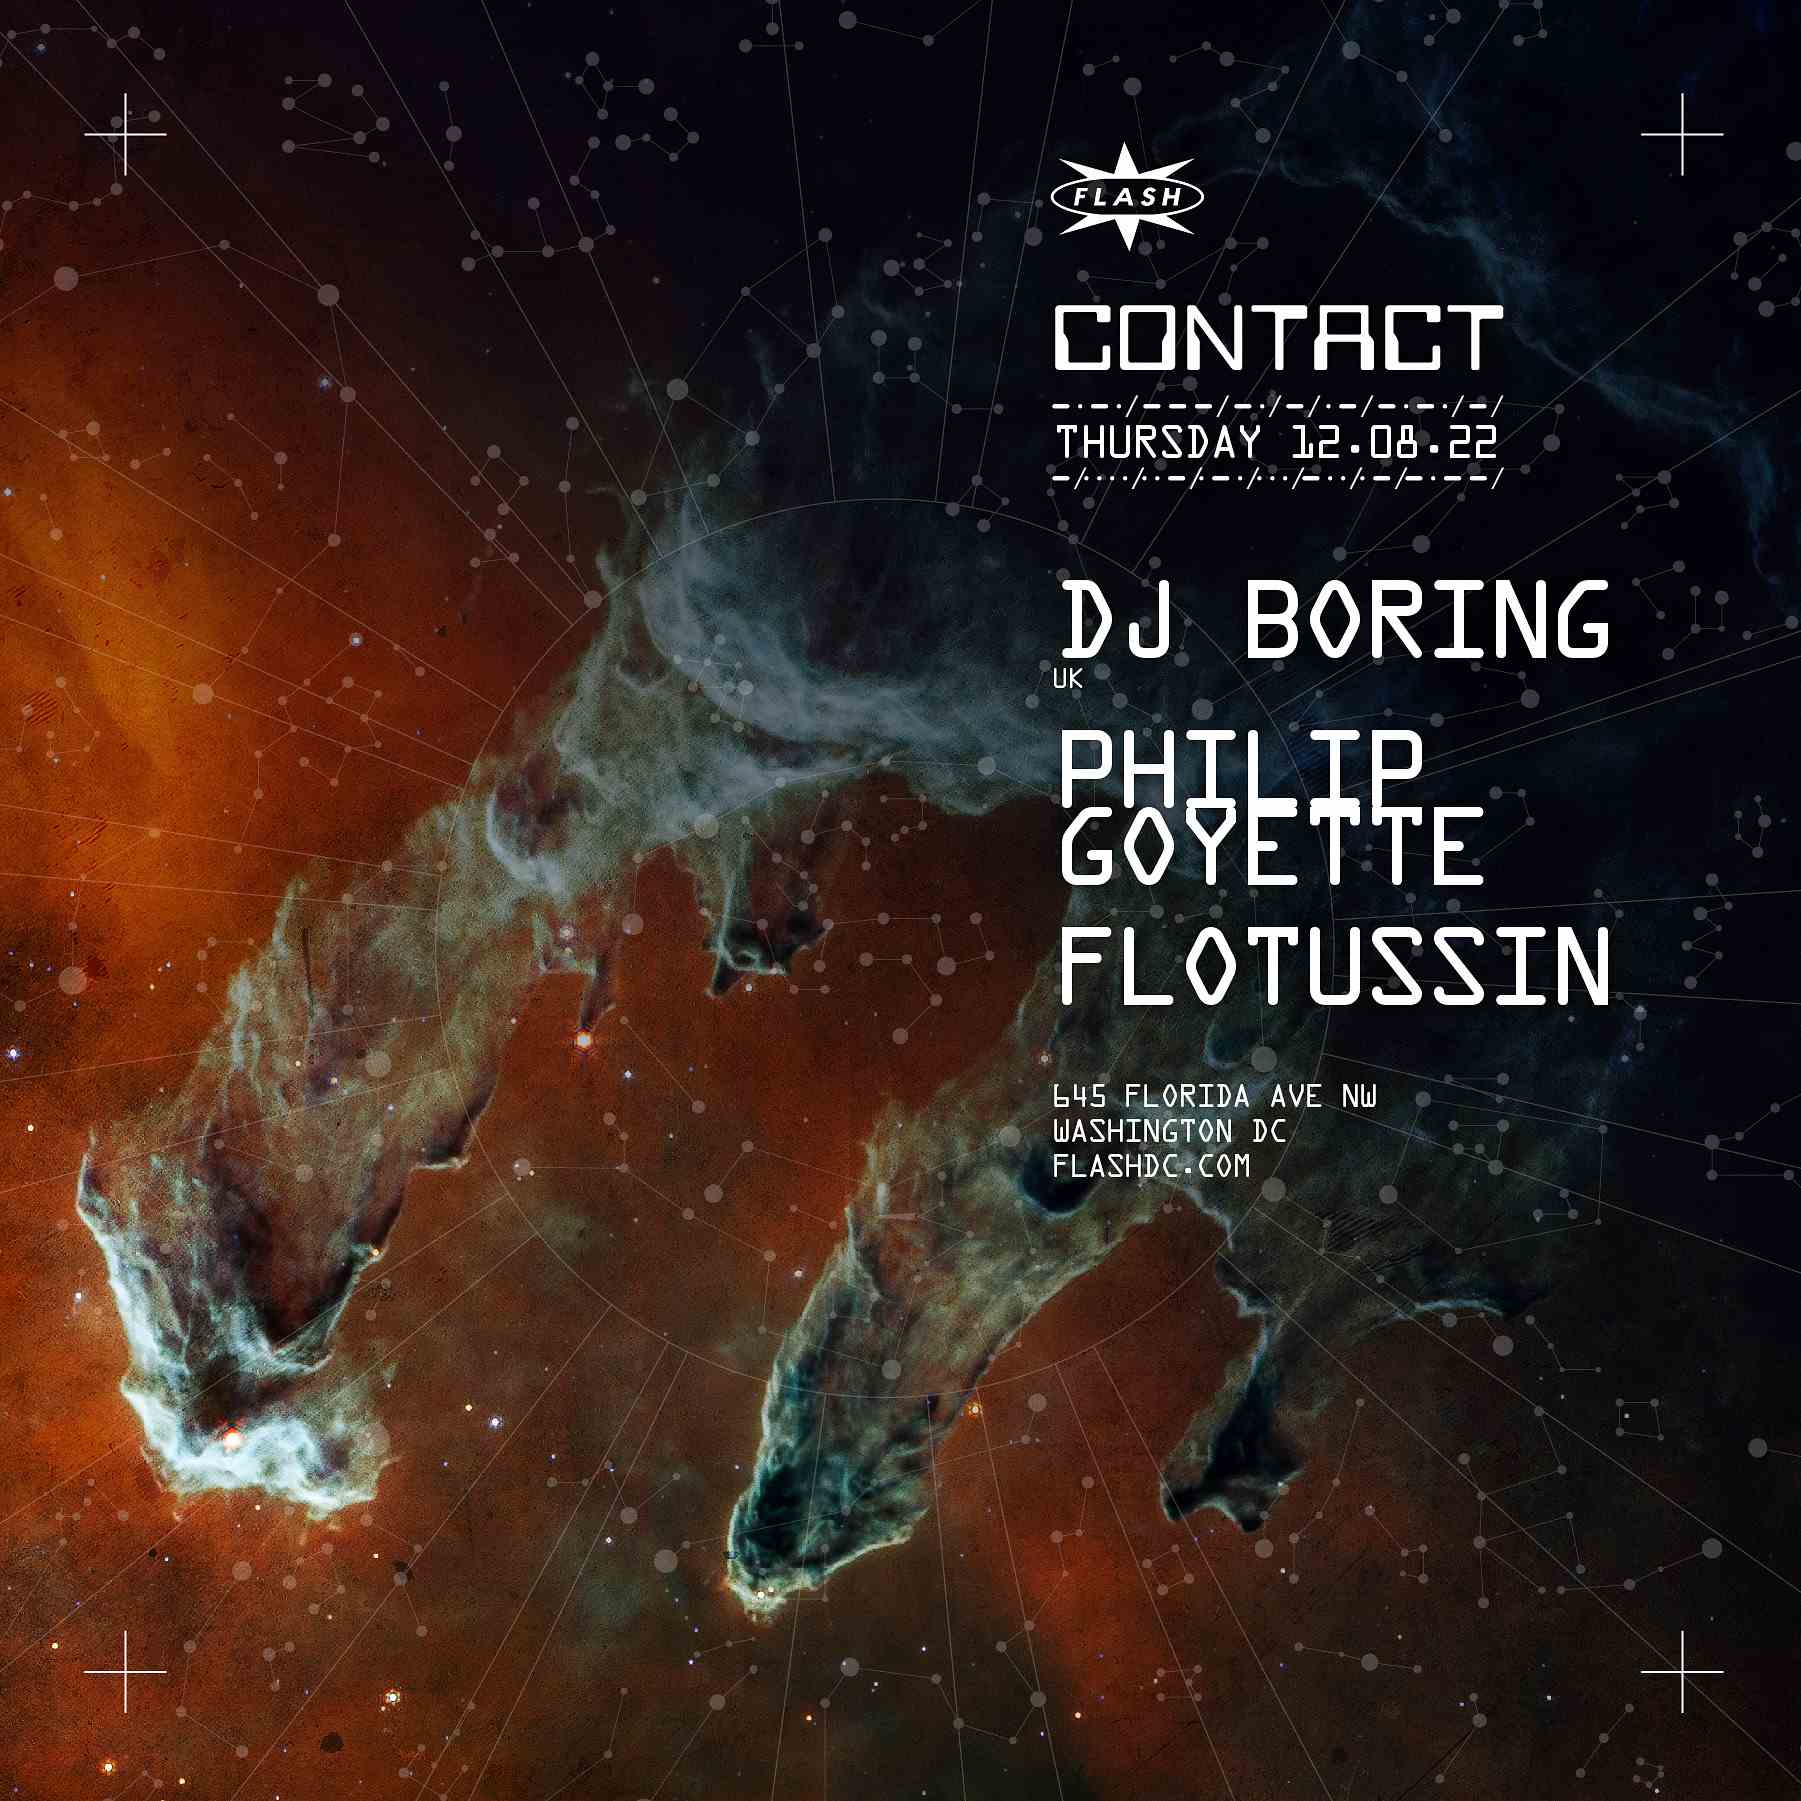 Event image for CONTACT: DJ Boring - Philip Goyette - Flotussin